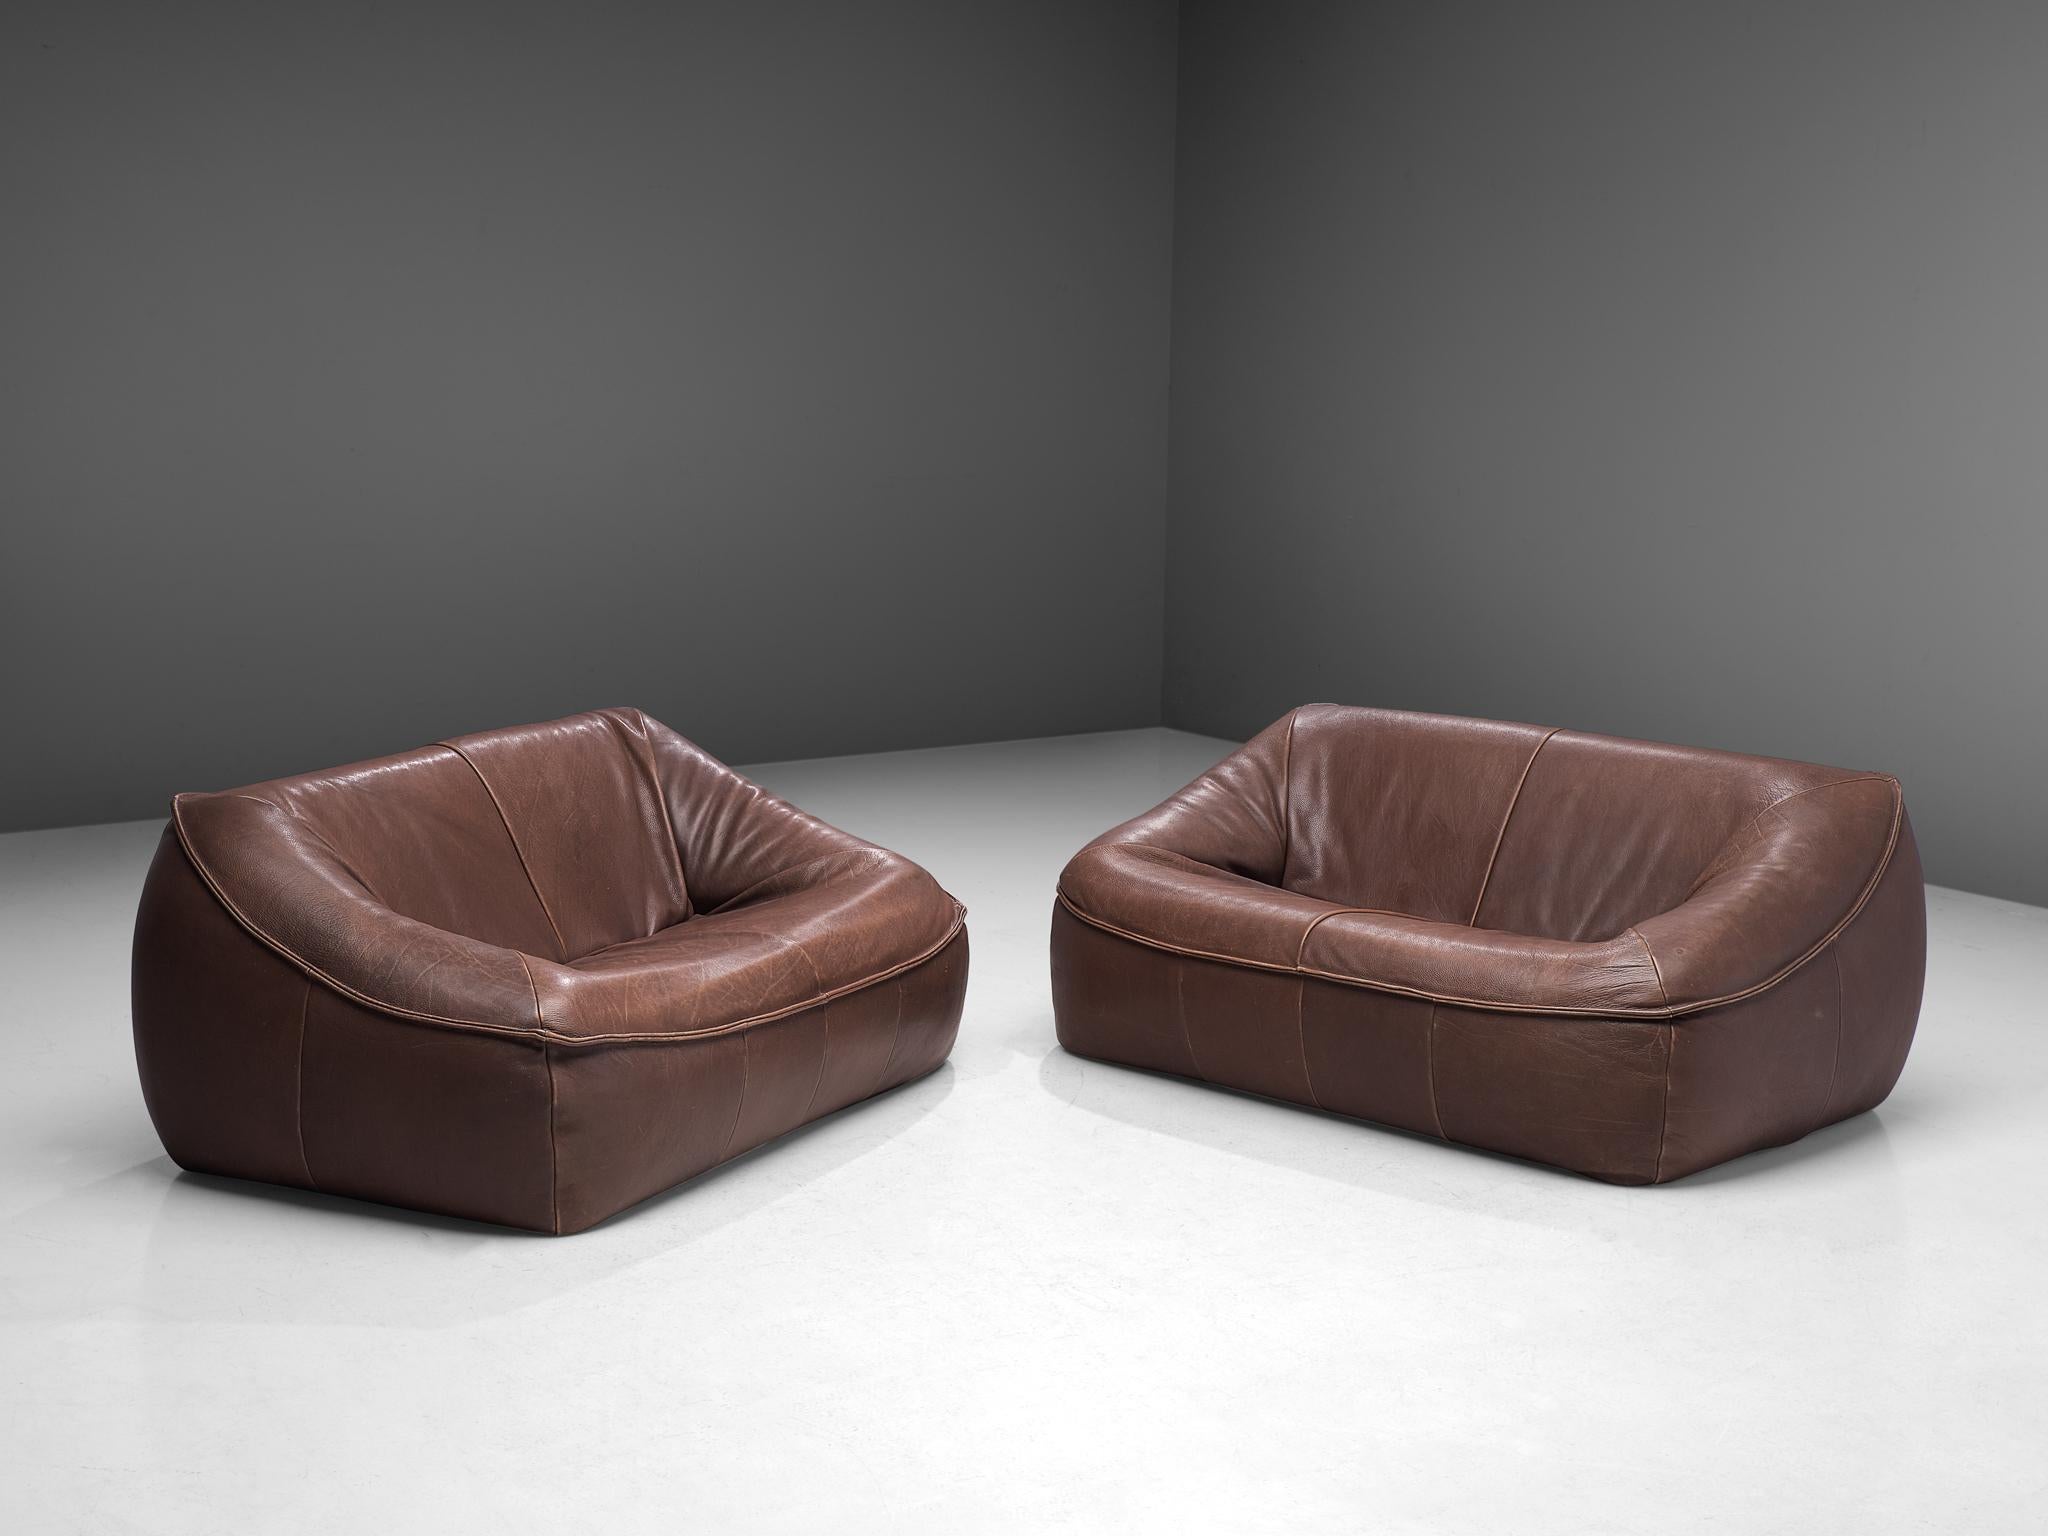 Gerard Van Den Berg for Montis, pair of 'Ringo' settees, buffalo leather, The Netherlands, 1974.

These grand and bulky two-seat 'Ring' sofas are designed by the Dutch designer Gerard Van Den Berg. The sofas are comfortable and shaped as a large